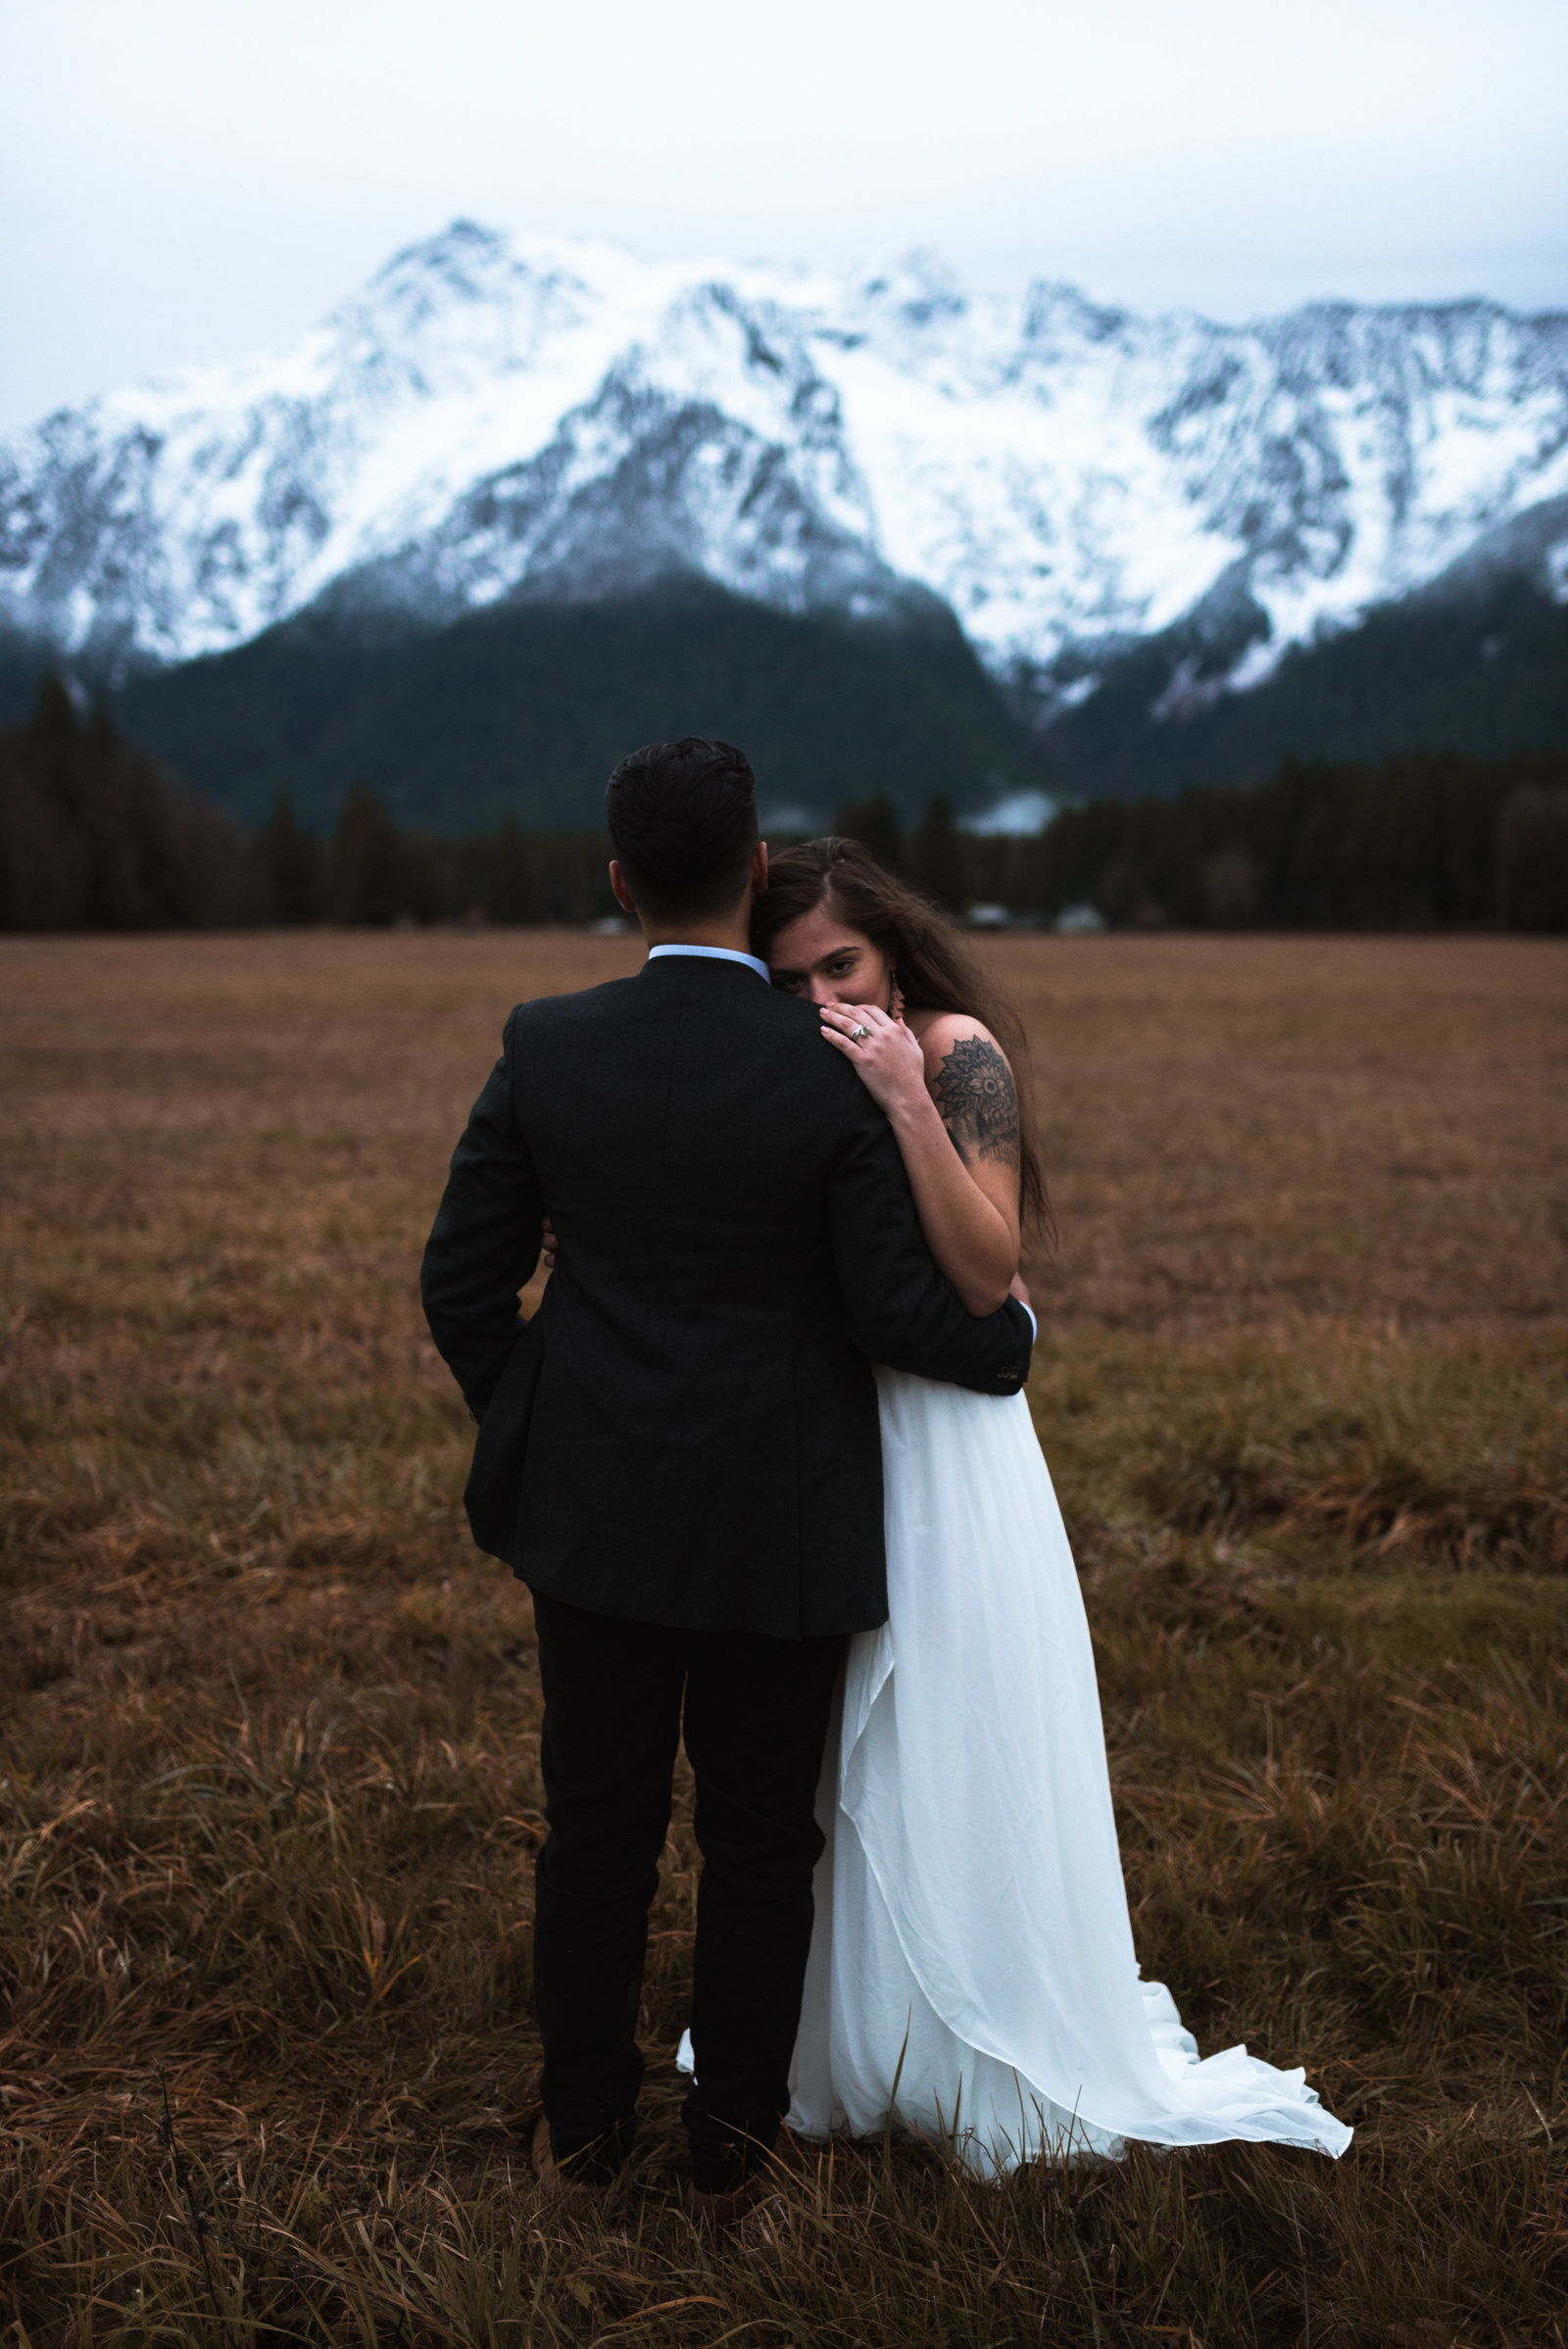 Couple in wedding attire, holding each other with snowy mountain in background.